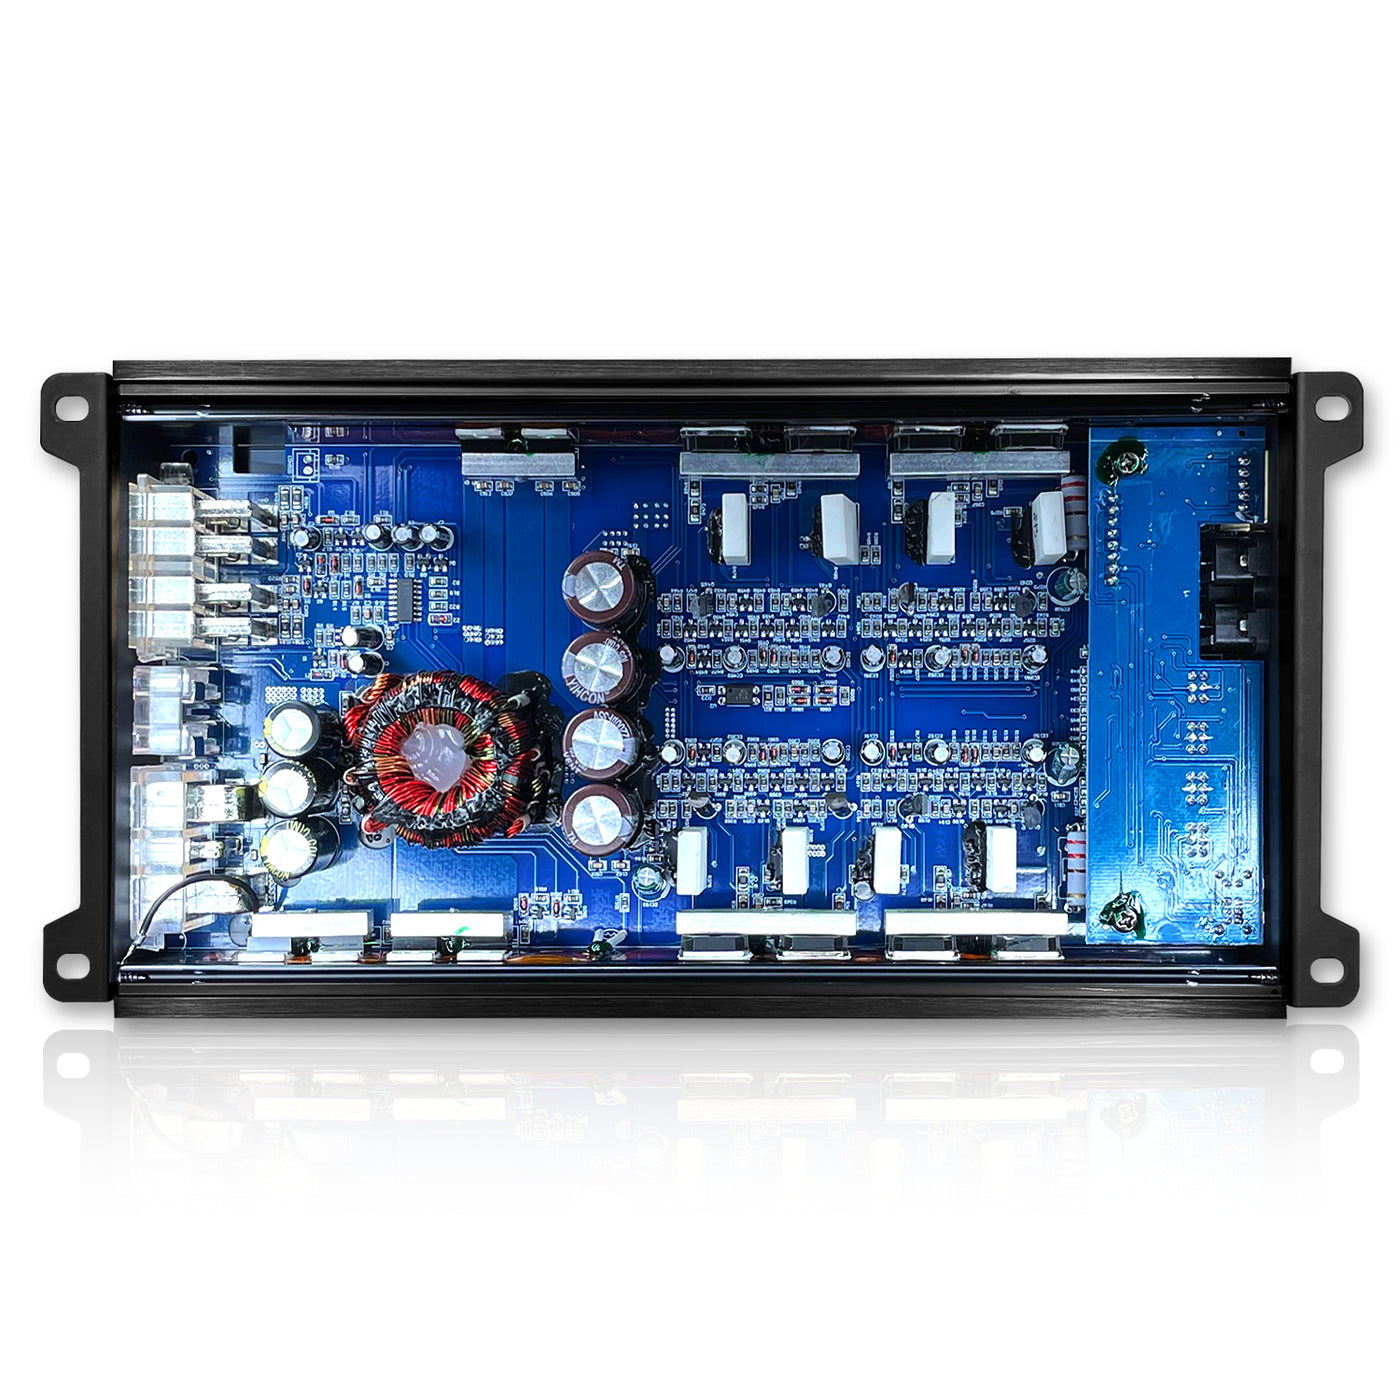 CT-80.4AB // 480 Watts RMS 4-Channel Car Audio Amplifier